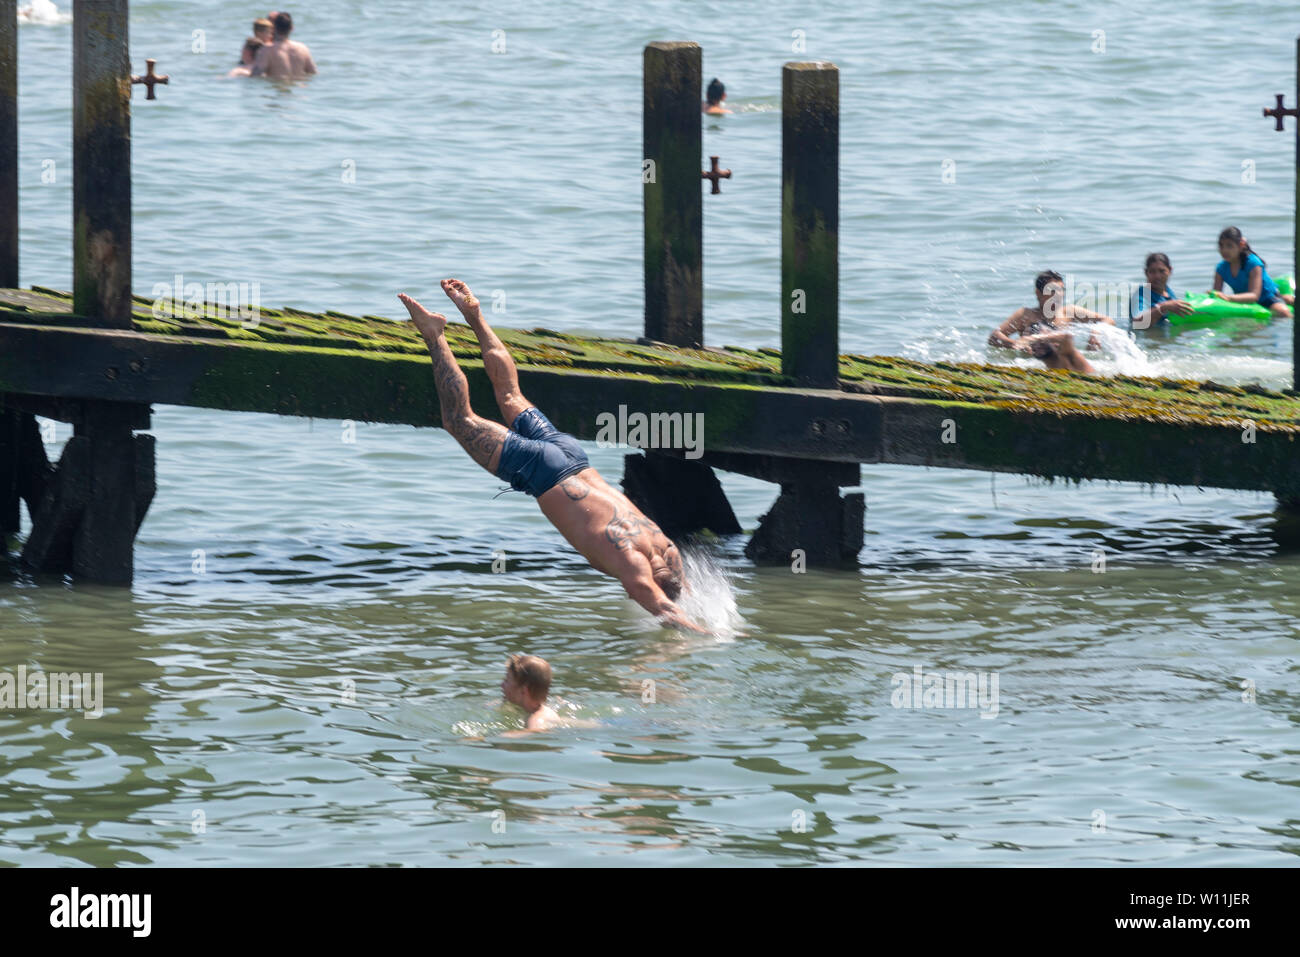 The hot heatwave weather has brought people to Southend to enjoy the beaches, the Estuary, with a male diving in to the Thames Stock Photo